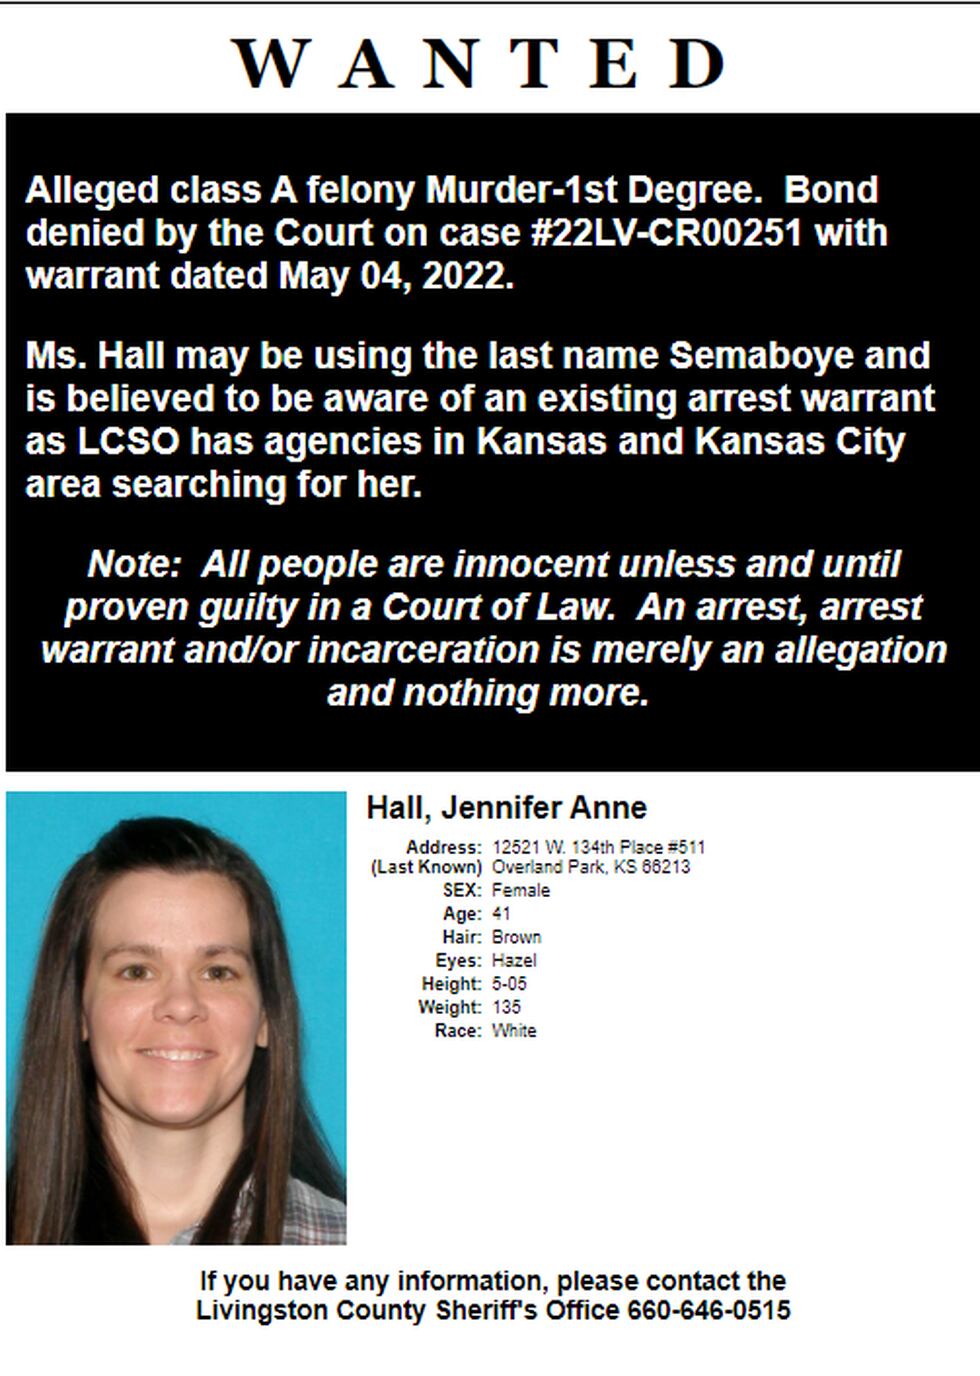 Jennifer Hall is wanted by the Livingston County Sheriff's Office for first degree murder.